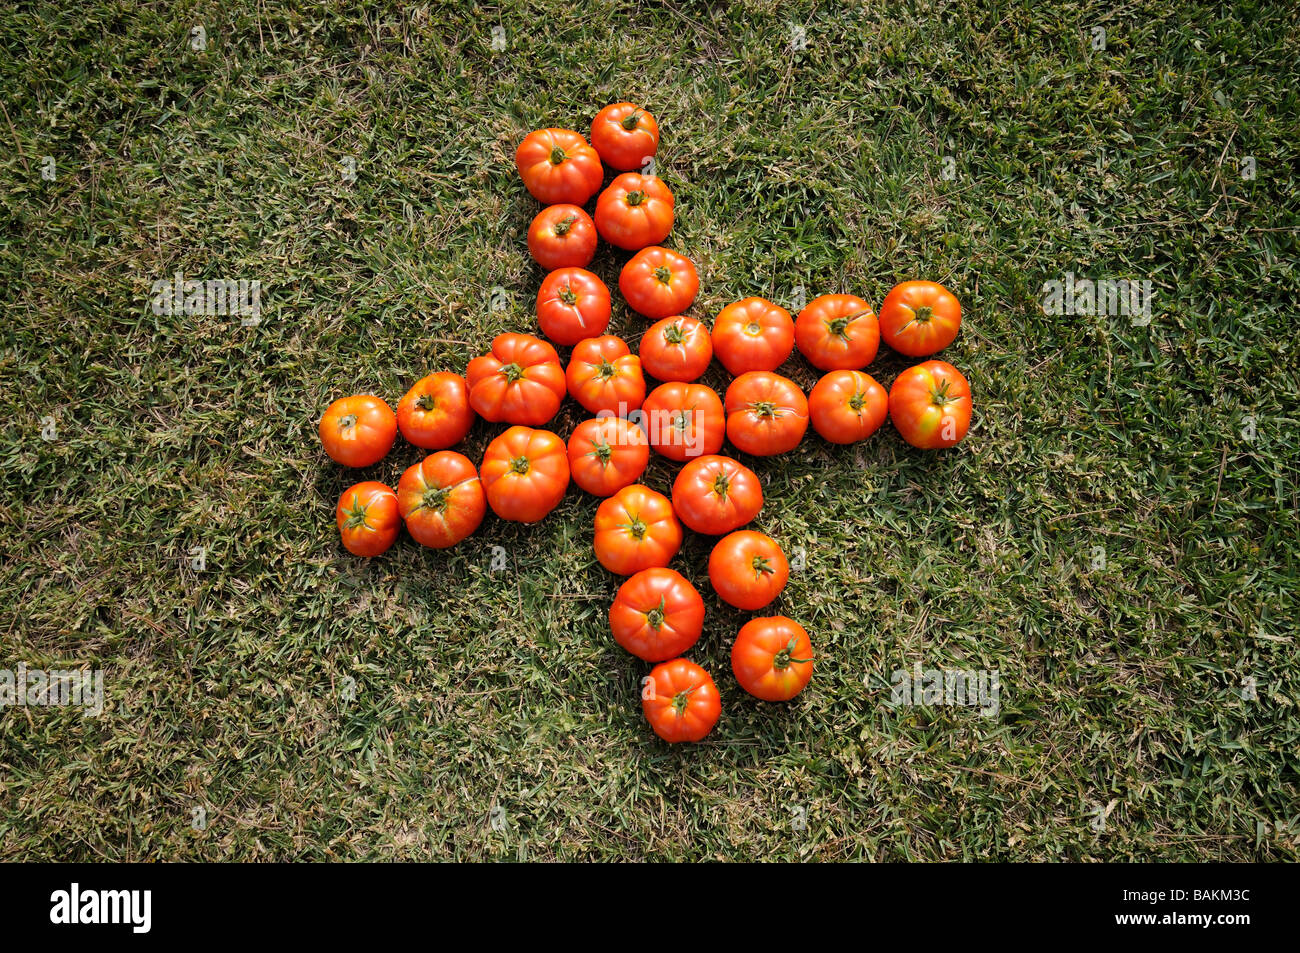 Group of tomatoes representing a cross over the grass. Stock Photo